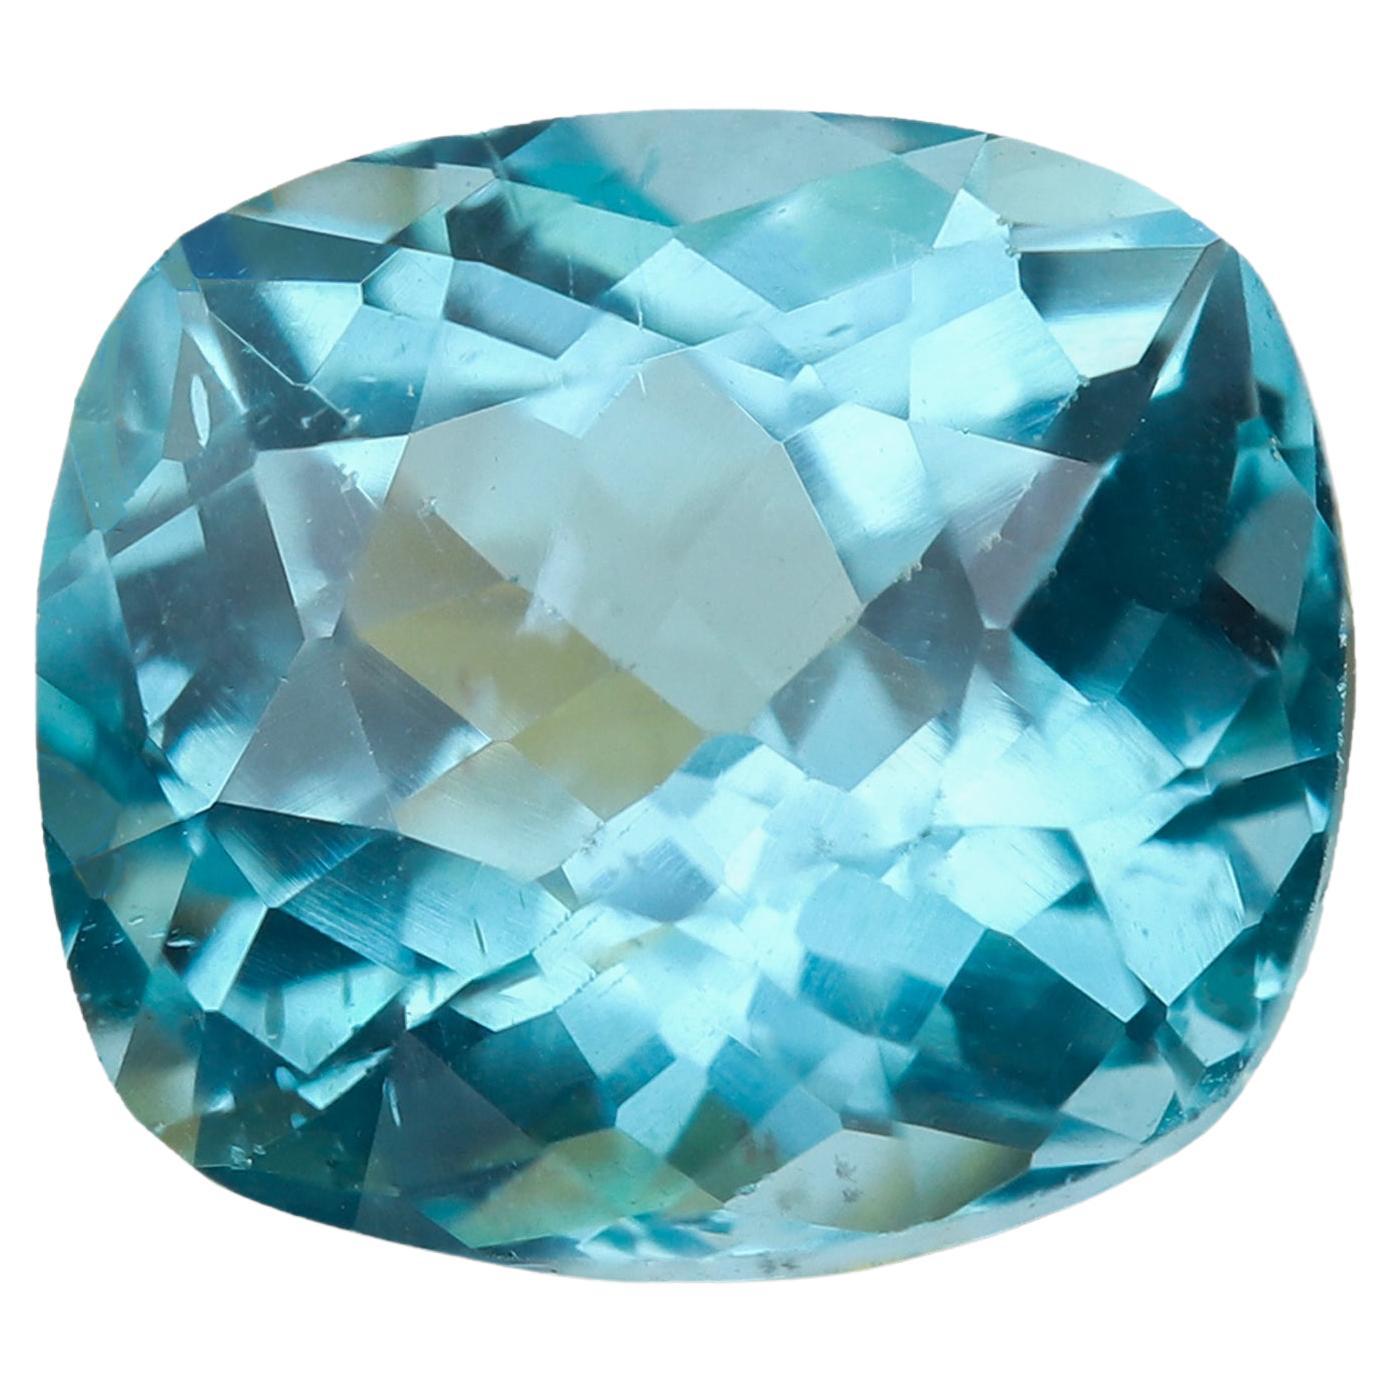 1.36 Carats Natural Blue Apatite Stone From Madagascar Apatite Gemstones For Sale